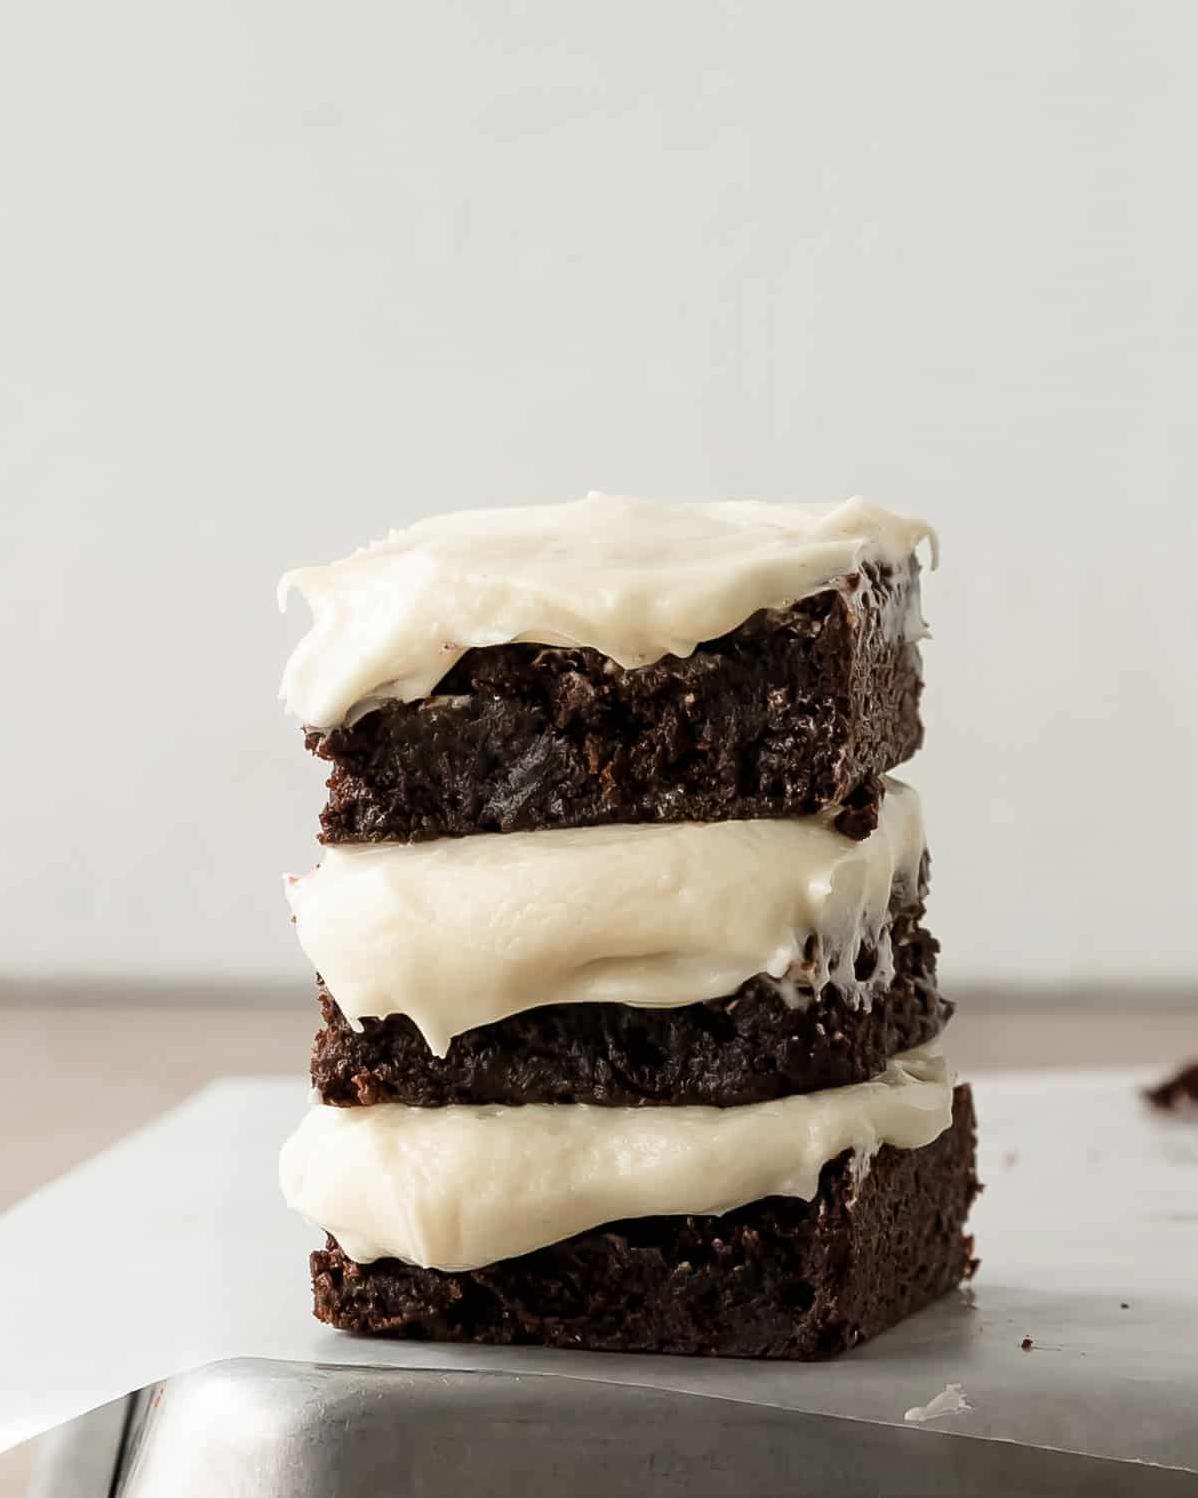  These fudgy brownies are the perfect afternoon pick-me-up.